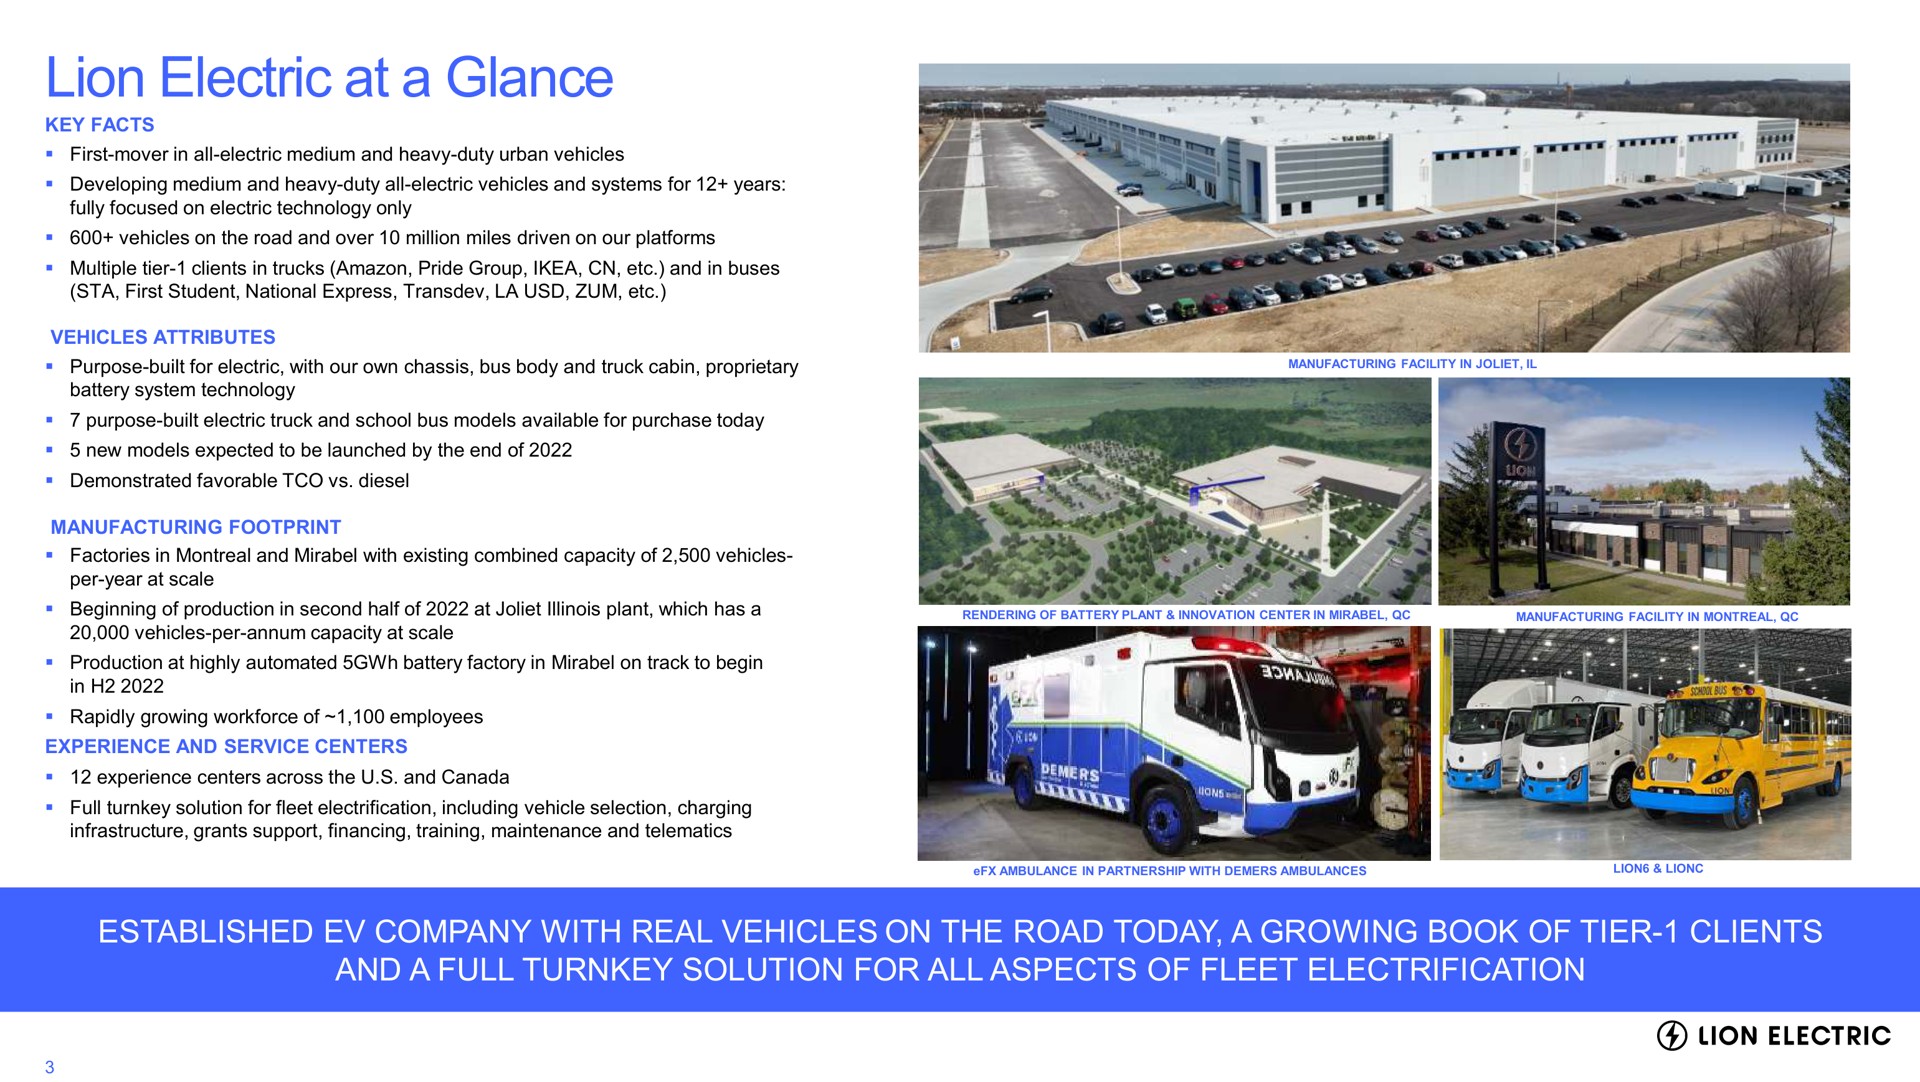 lion electric at a glance established company with real vehicles on the road today a growing book of tier clients and a full turnkey solution for all aspects of fleet electrification | Lion Electric